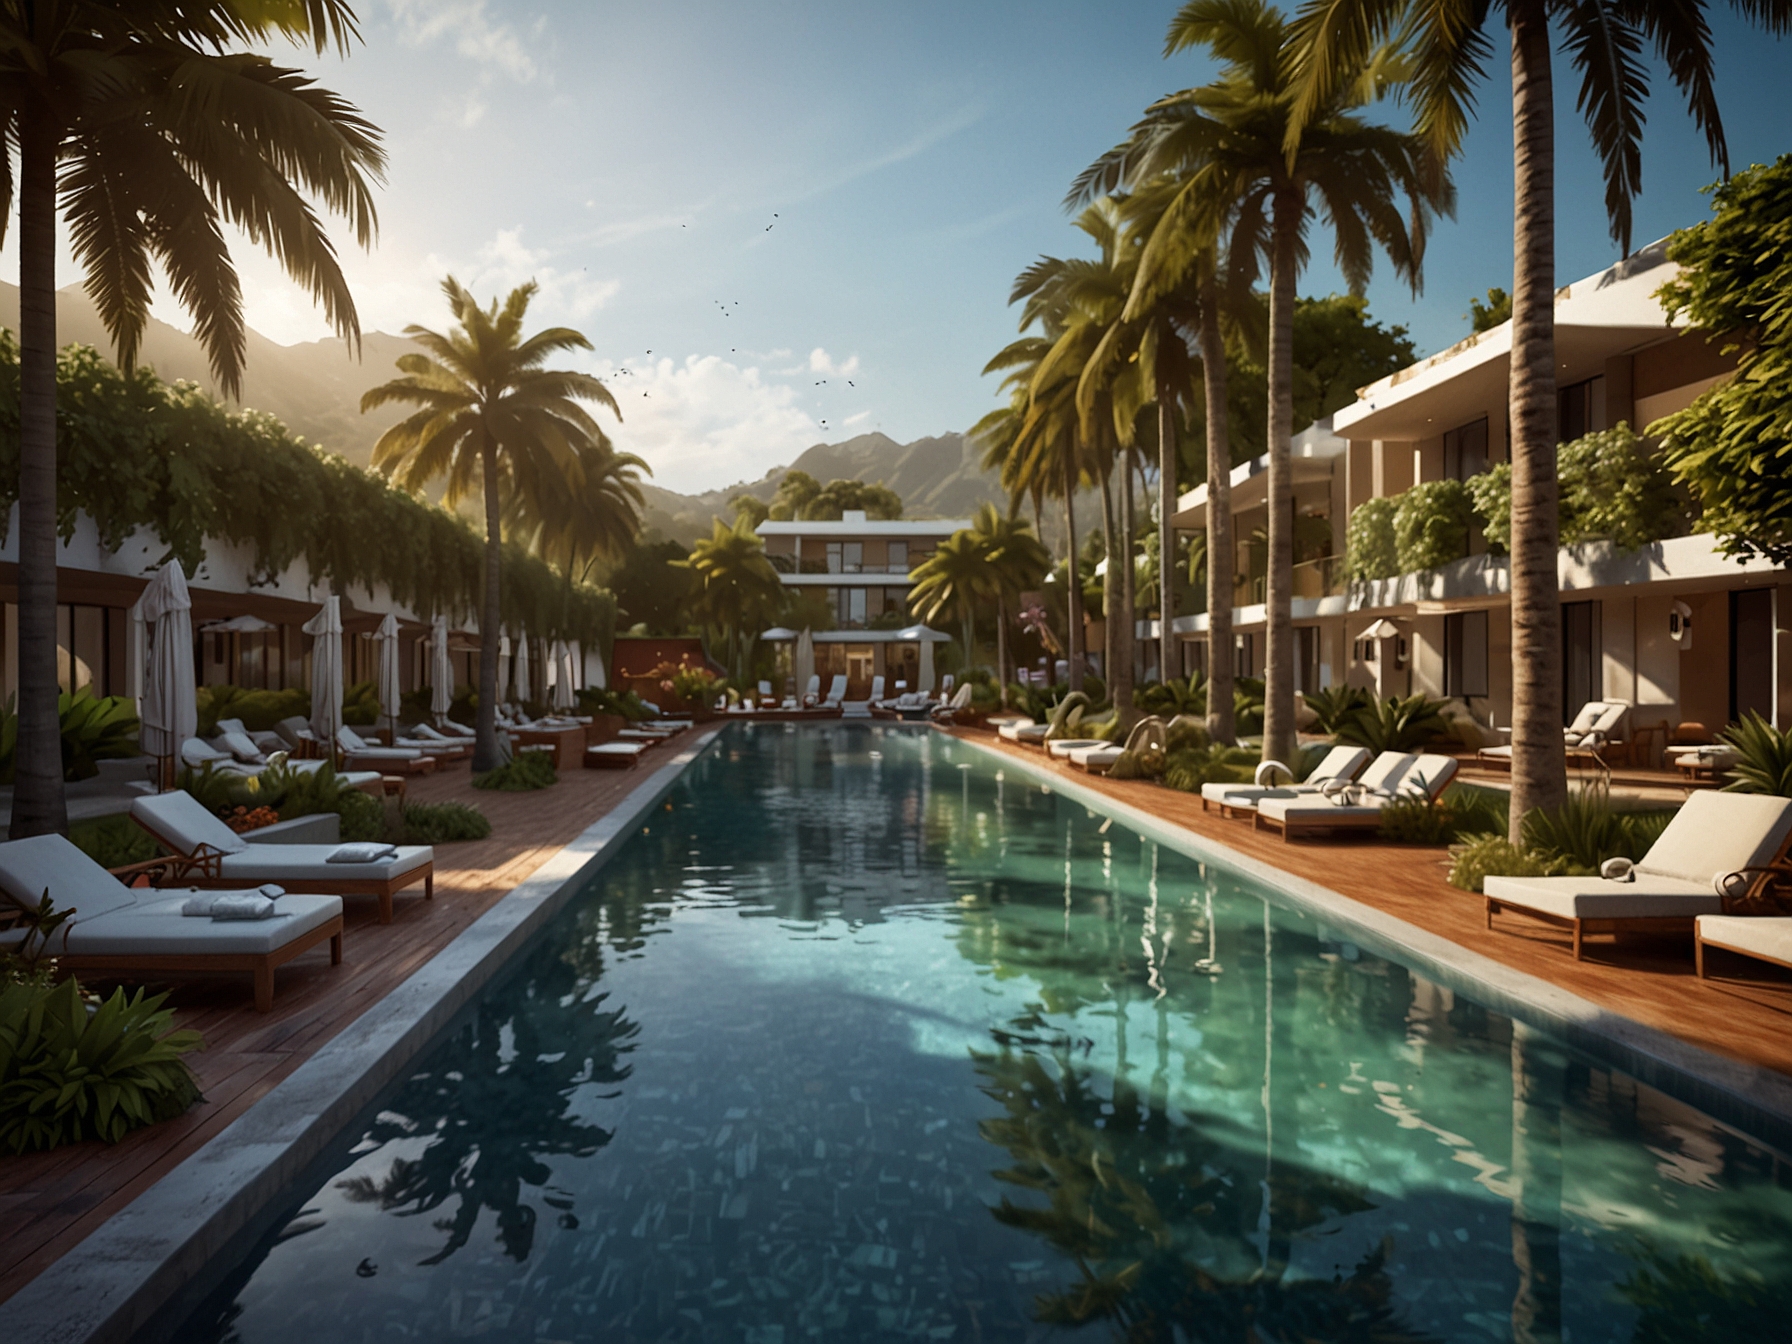 A picturesque outdoor area of the hotel featuring lush gardens, a sparkling pool, and inviting lounge chairs.